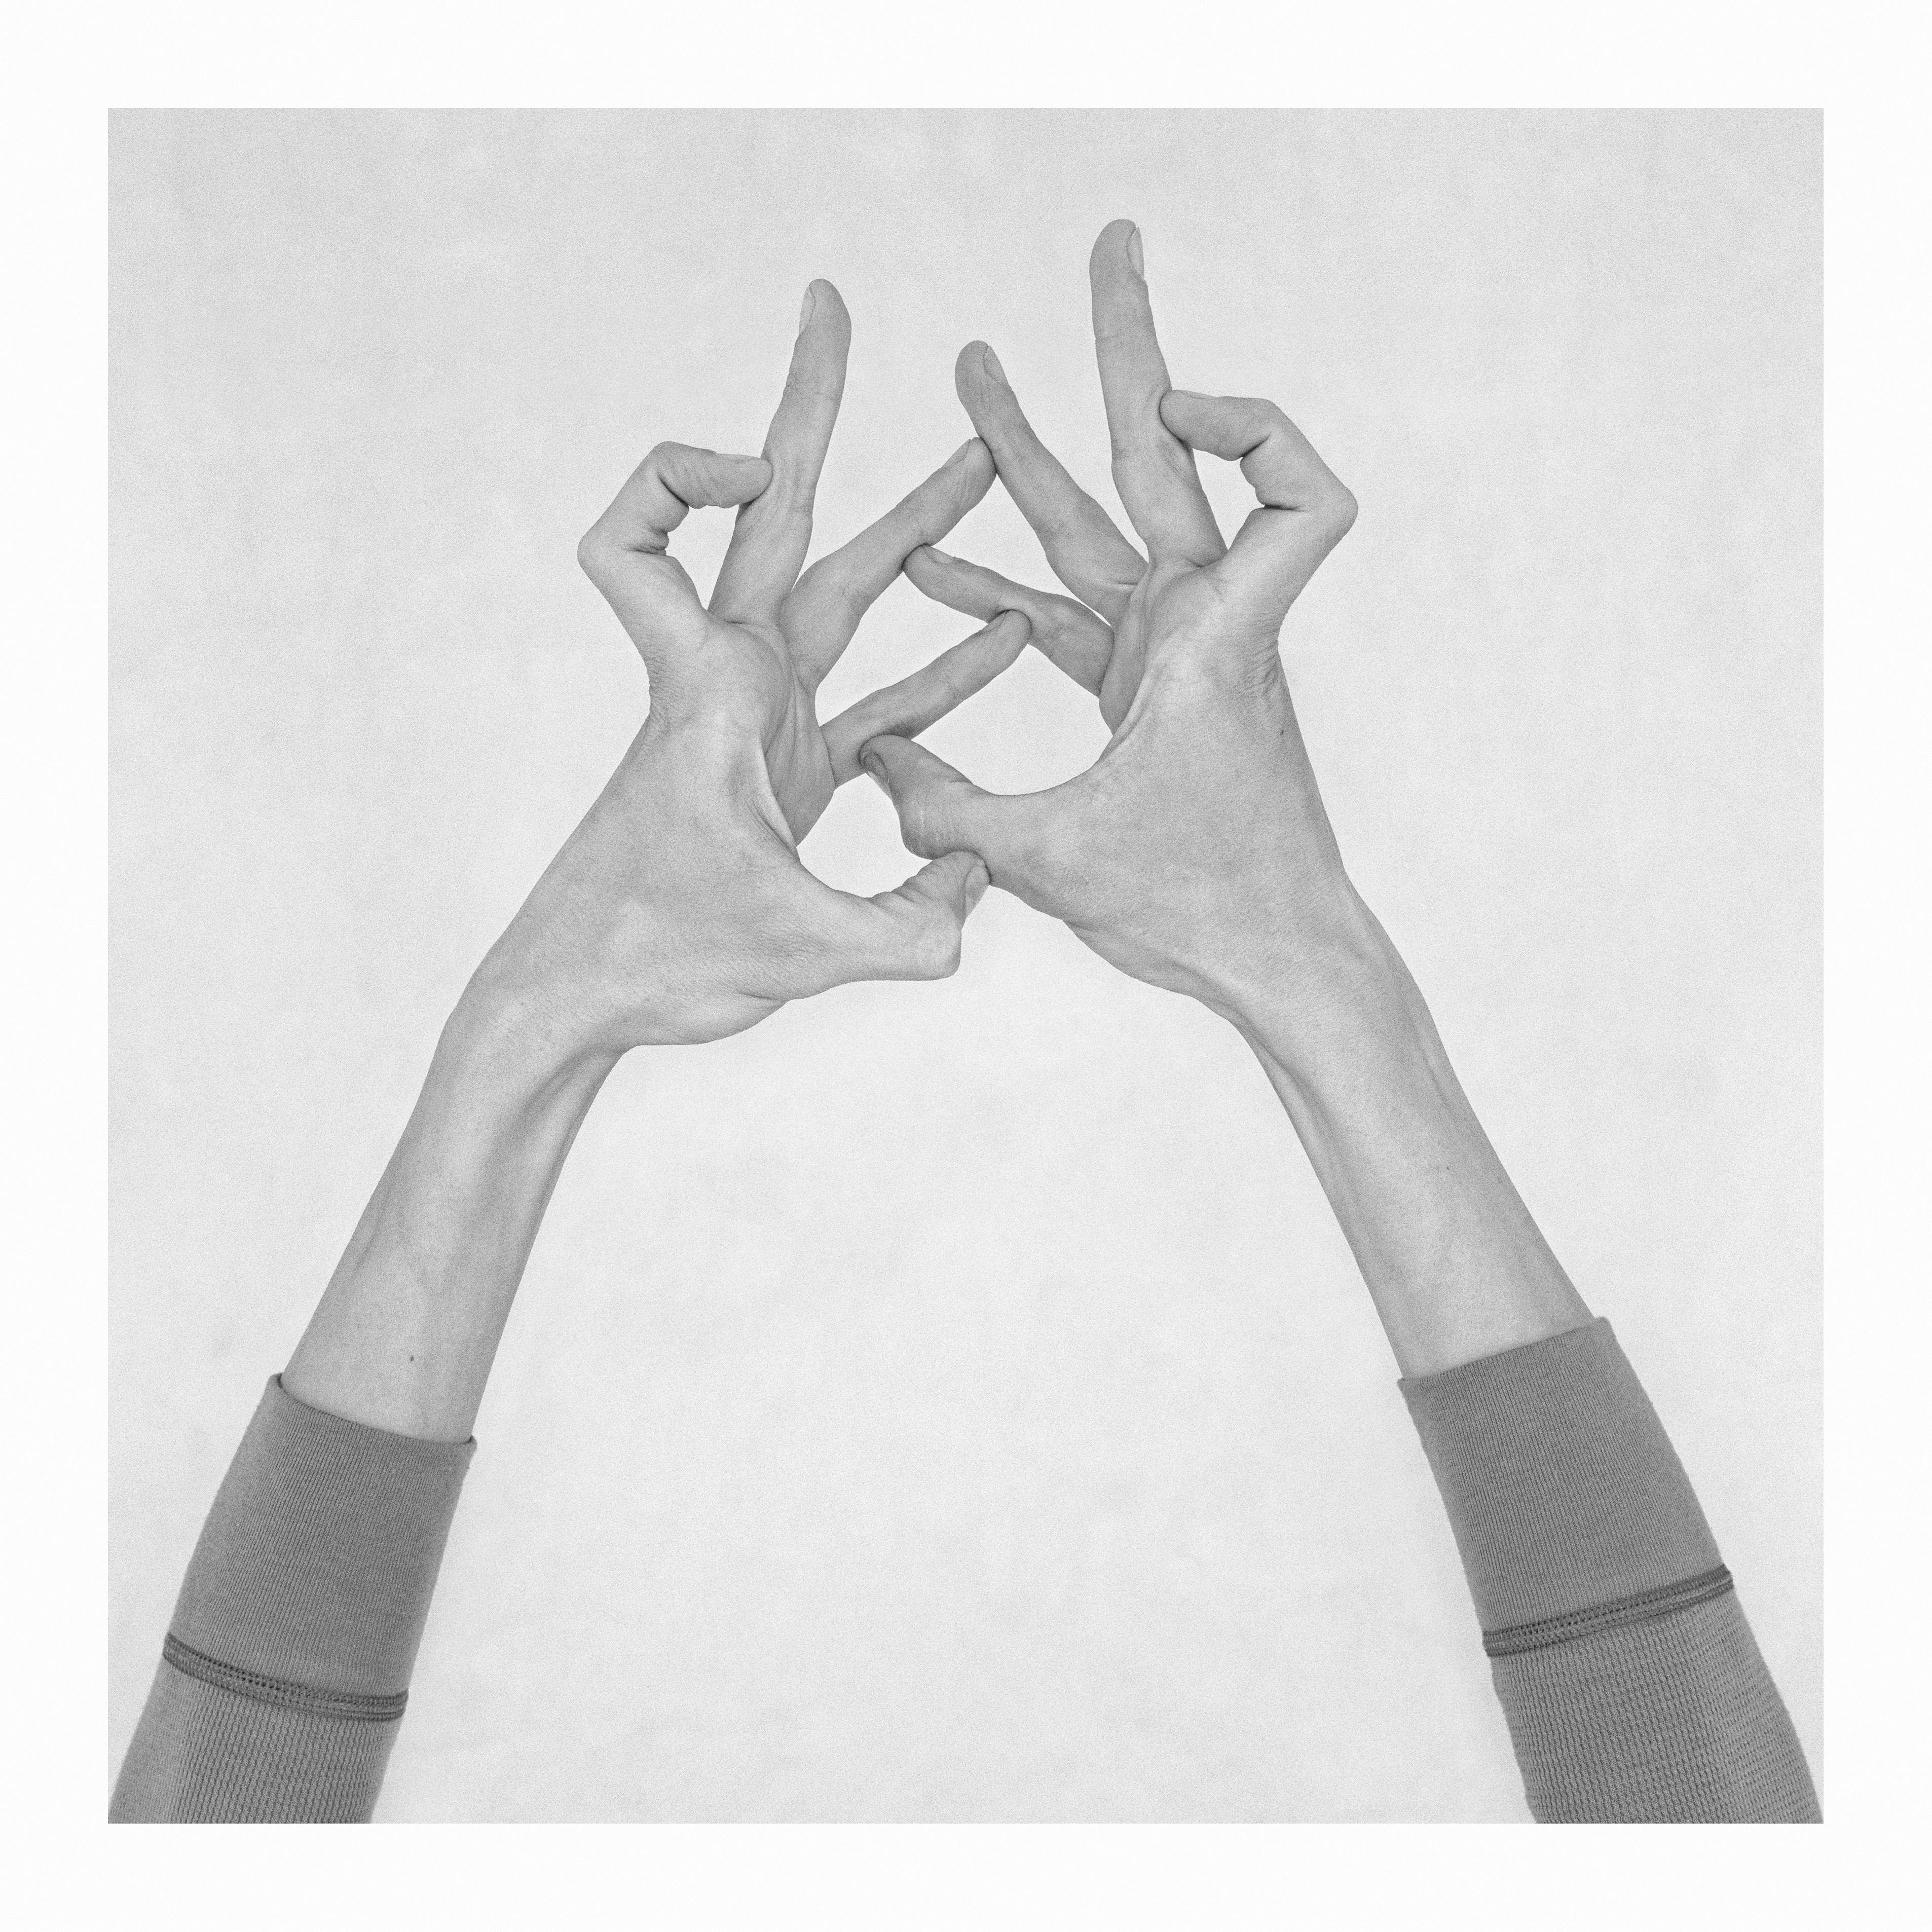 Nico Baixas / Gos-com-fuig Black and White Photograph - Untitled XXIV. From the Series Chiromorphose. Hands. Black & White Photography